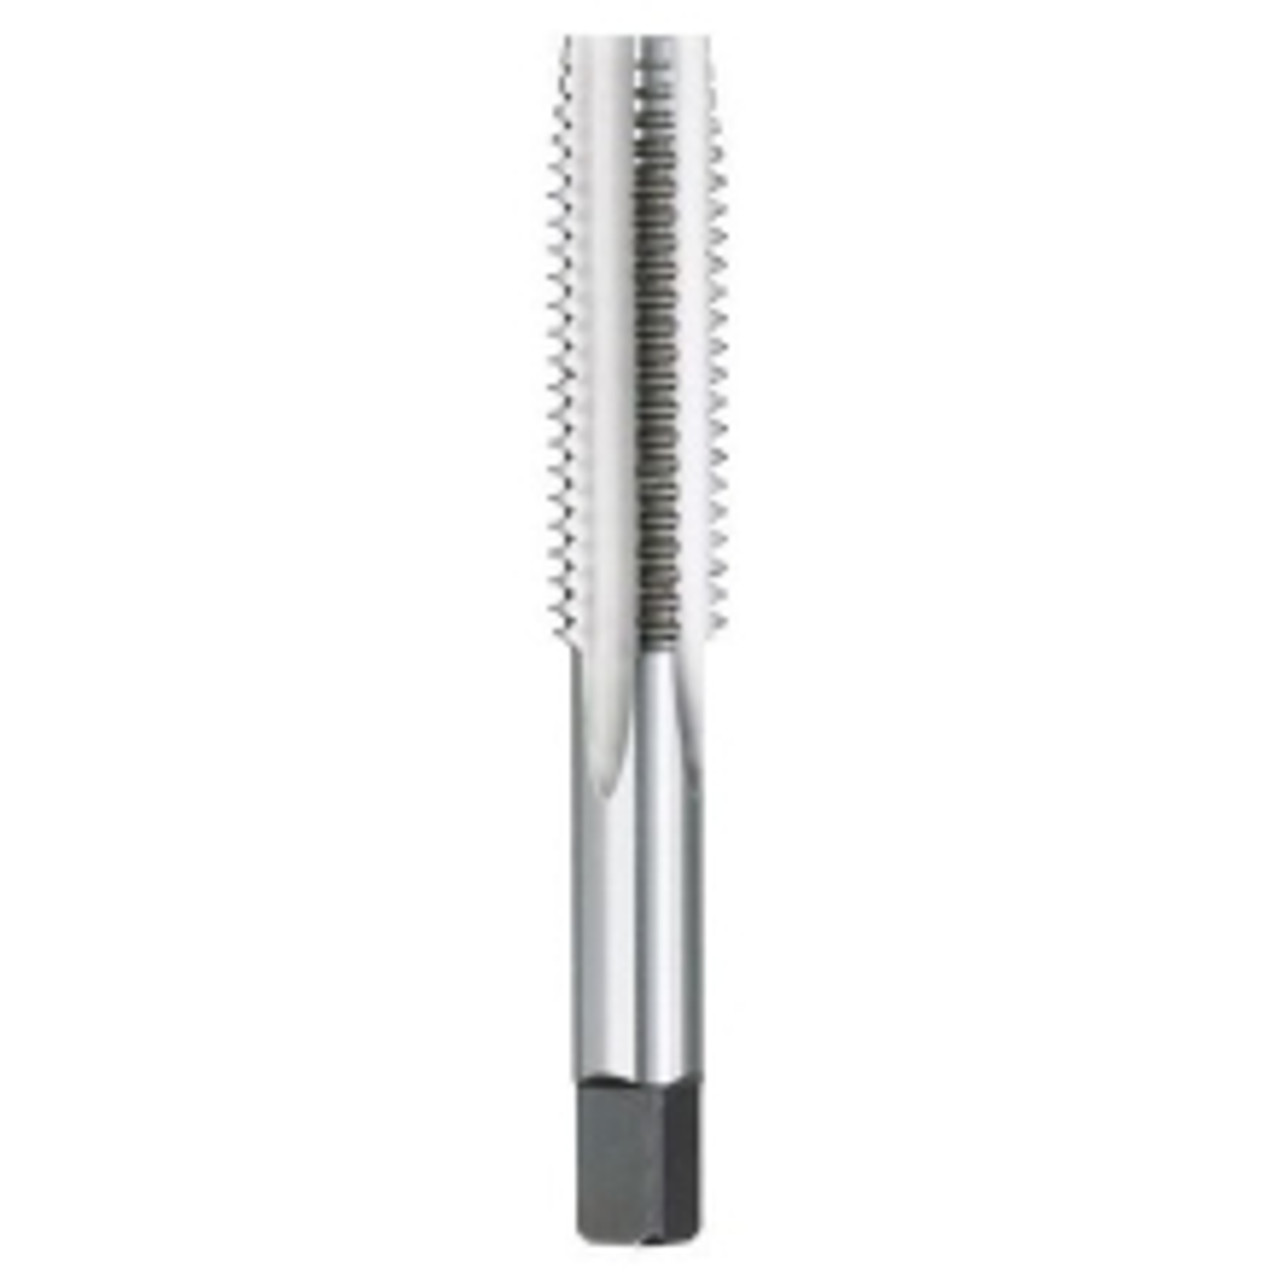 Hand Tap Chrome Alloy 10-32 UNF (3/16")